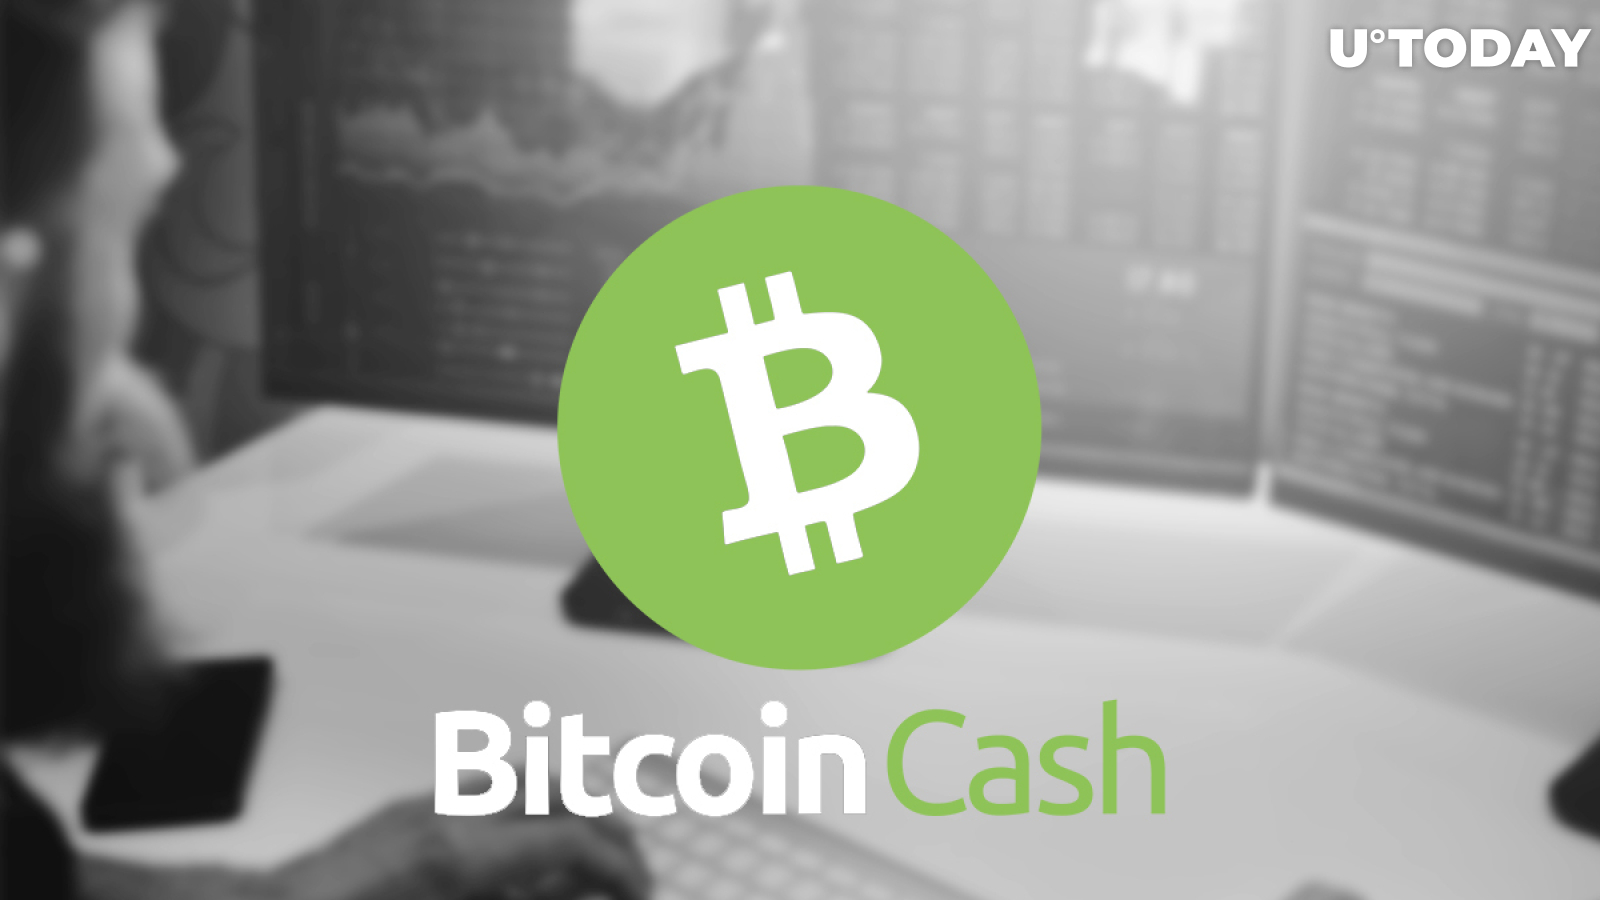 Trading Expert Suggests Bitcoin Cash Price Is on the Verge of a Breakout